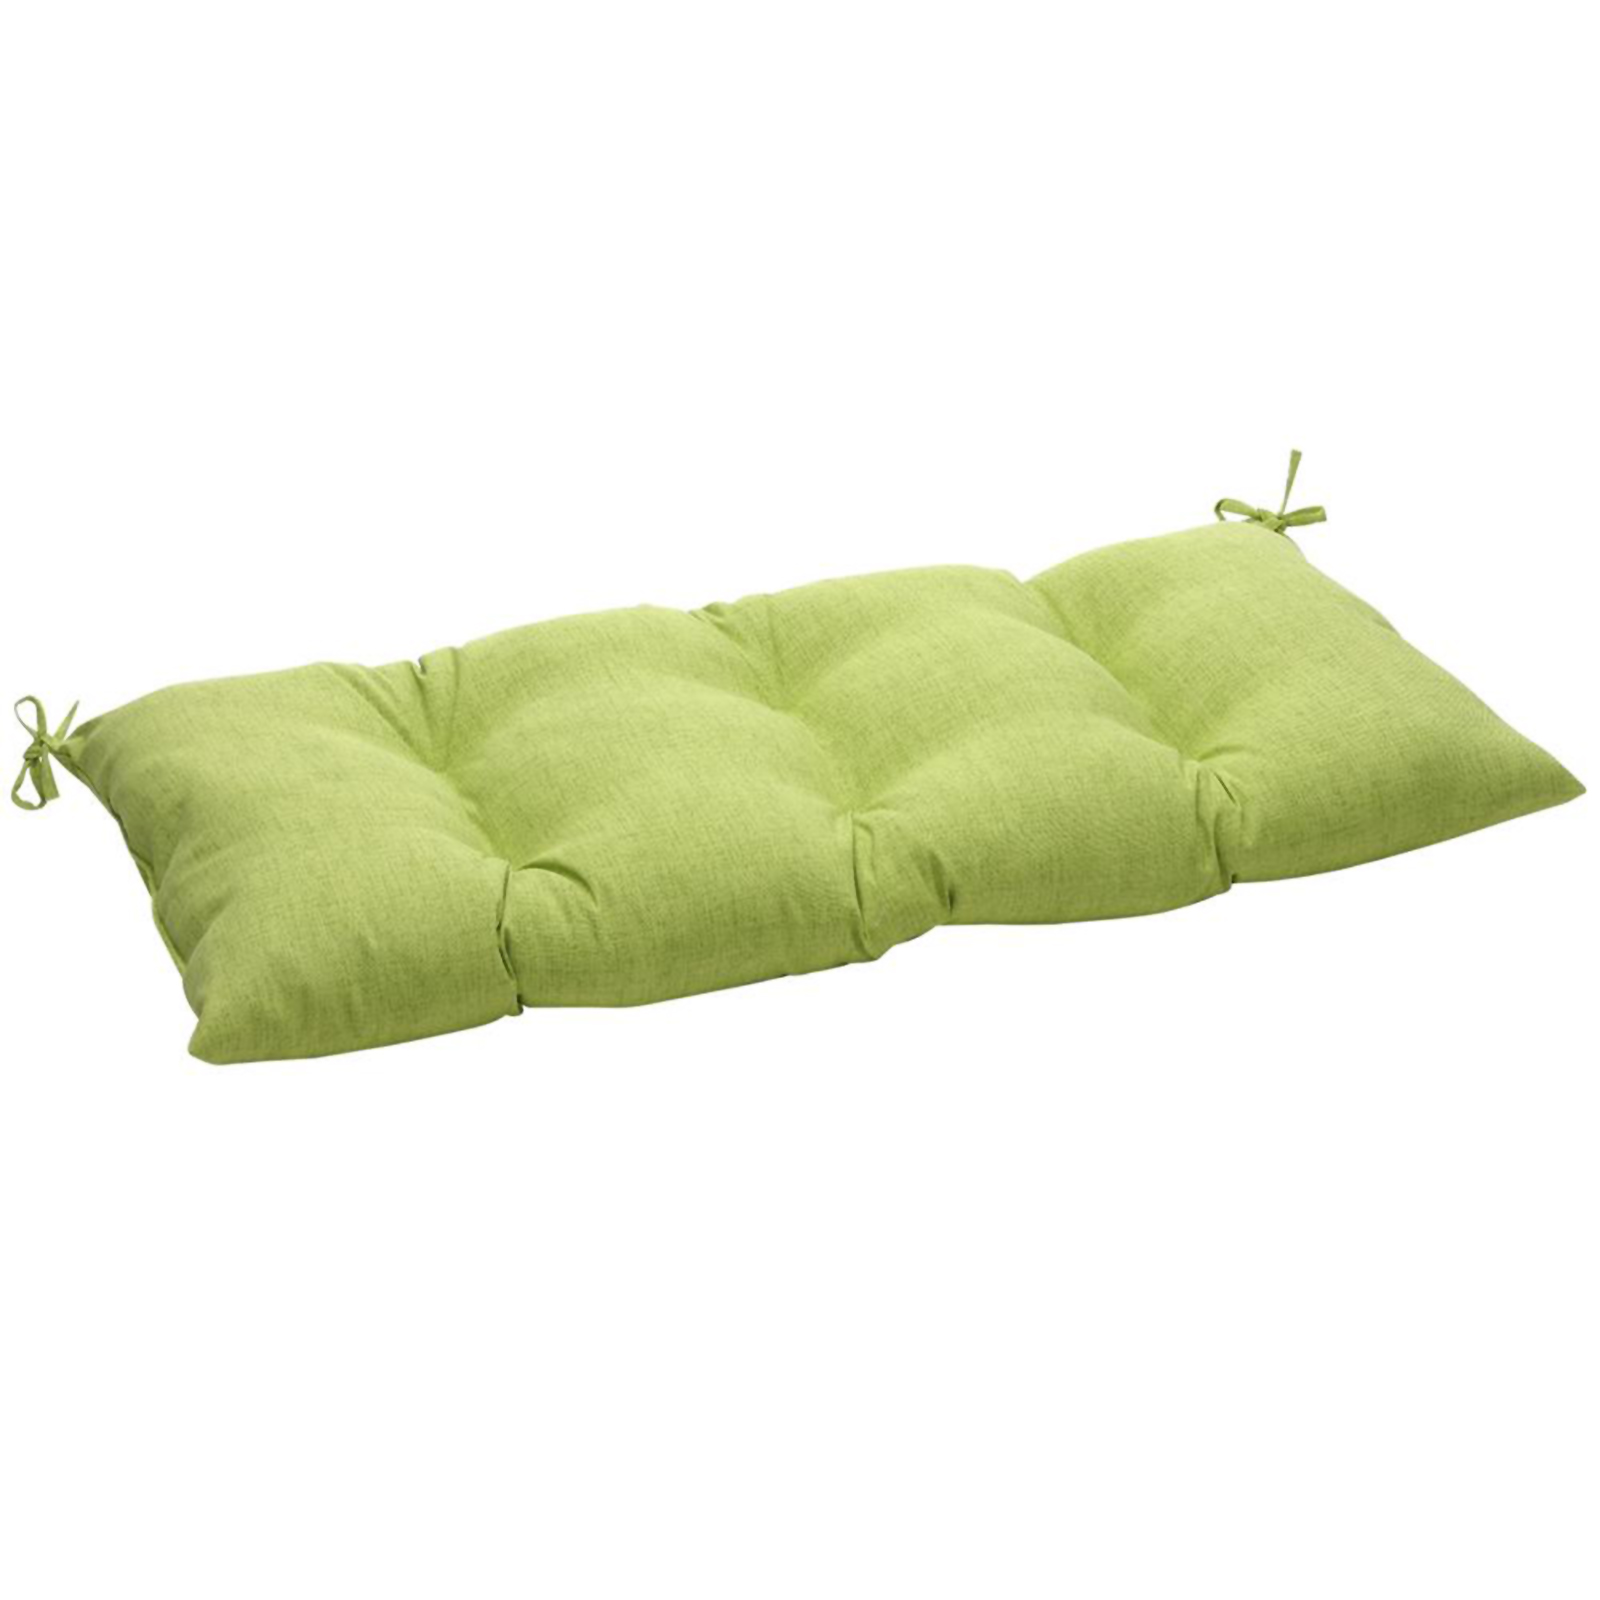 Pillow Perfect Outdoor/Indoor Polyester Swing/Bench Cushion - Baja Lime Green